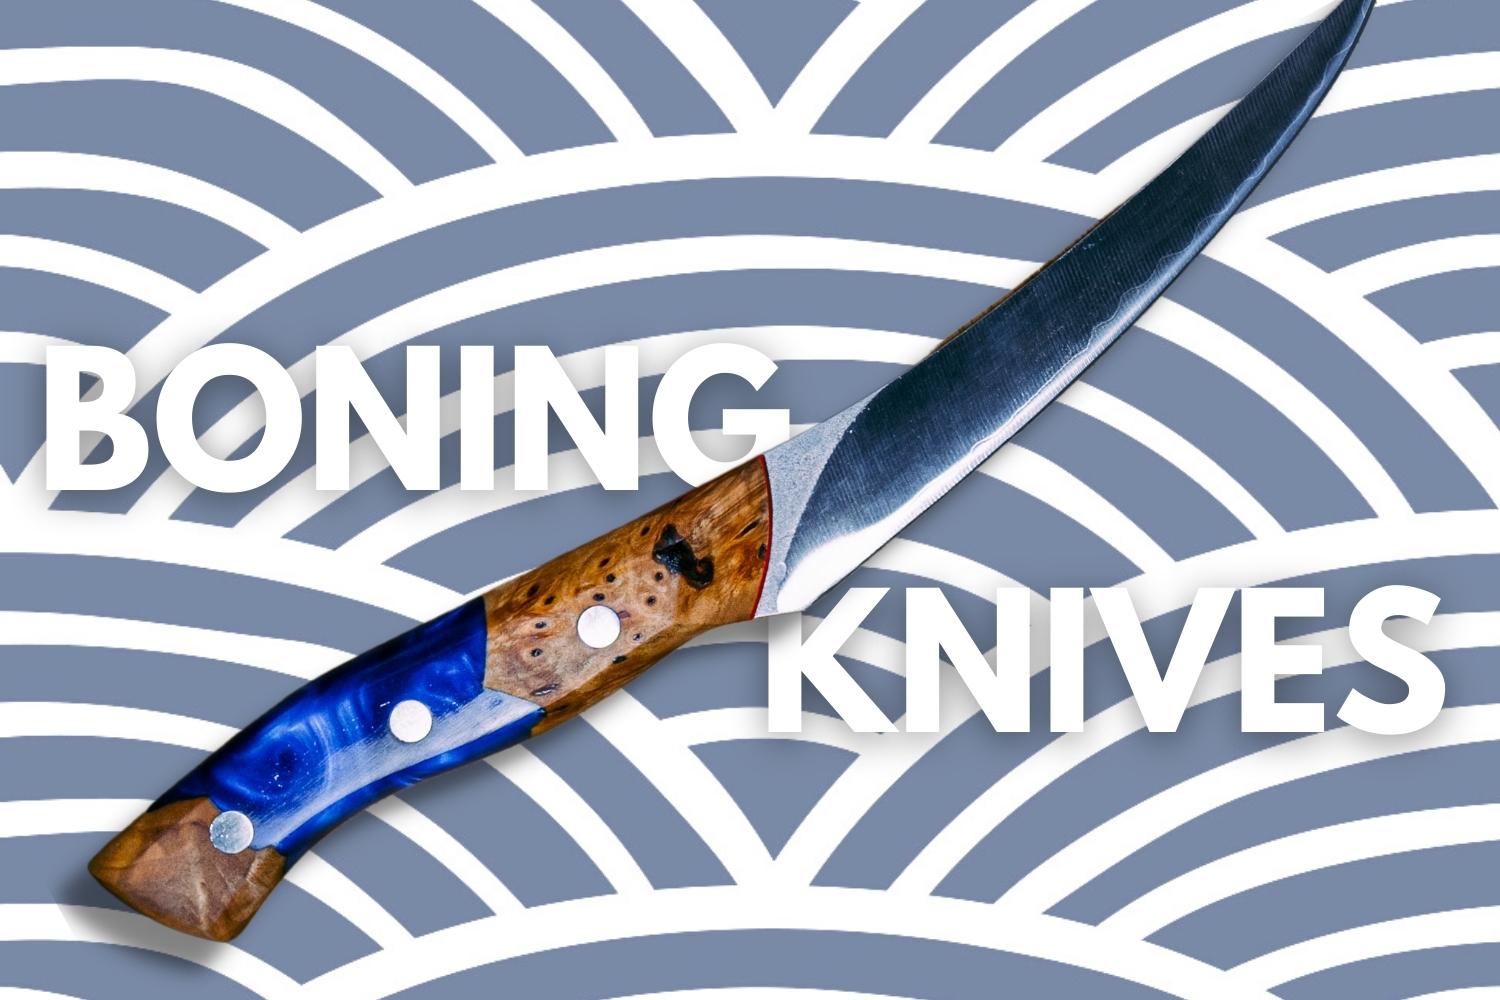 Your Complete Guide For Choosing, Using, And Caring For A Boning Knife